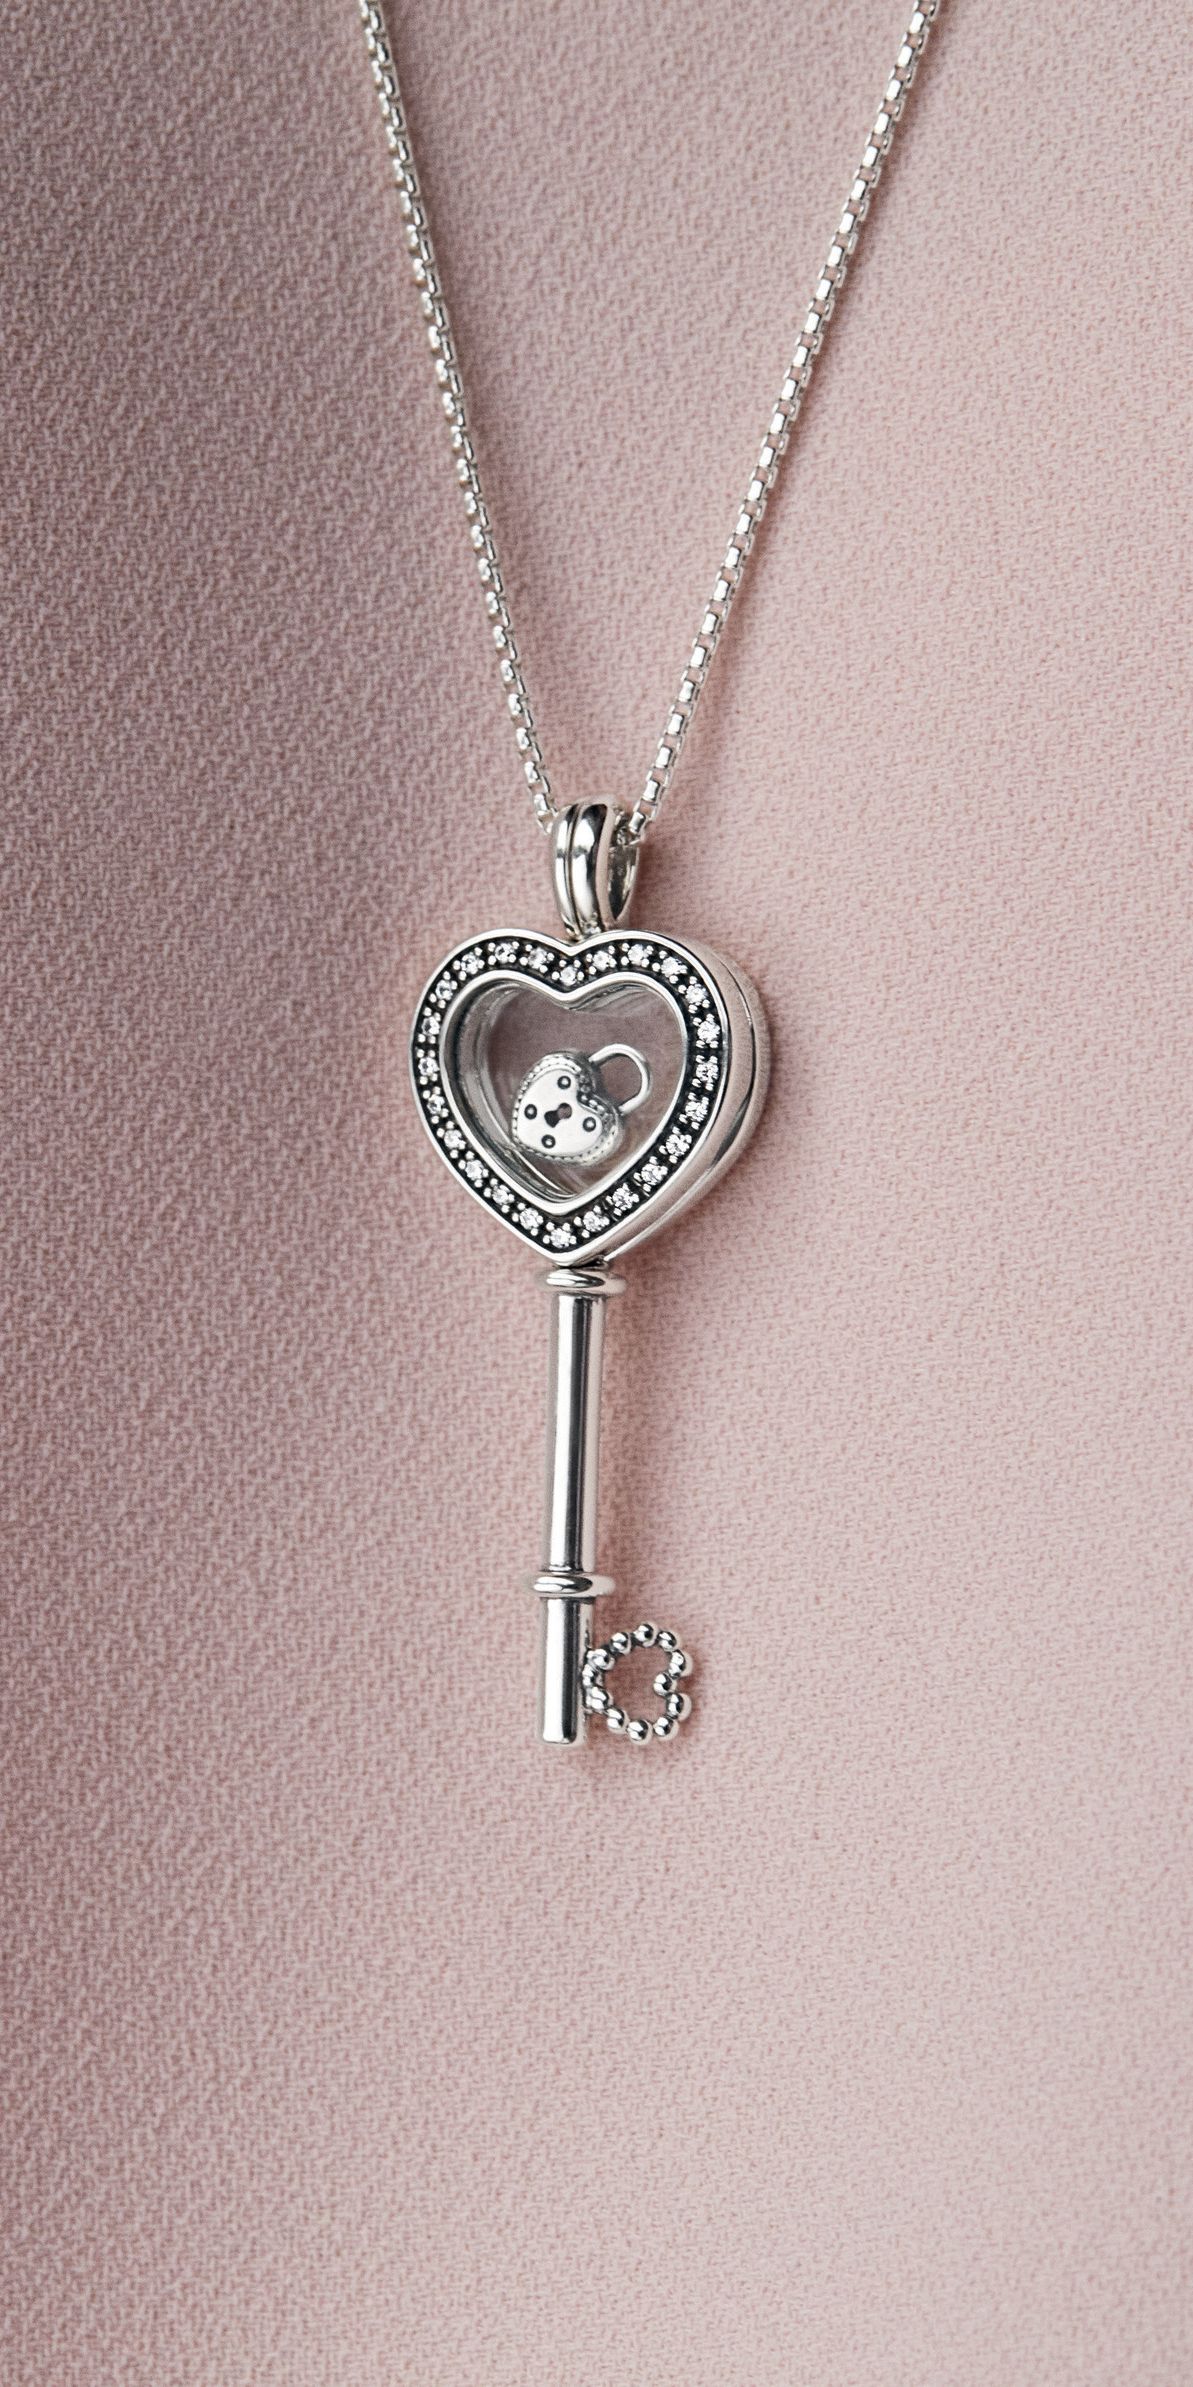 Valentine's Day Jewellery | Pandora In 2019 | Pandora Locket Intended For Most Up To Date Pandora Moments Small O Pendant Necklaces (View 5 of 25)